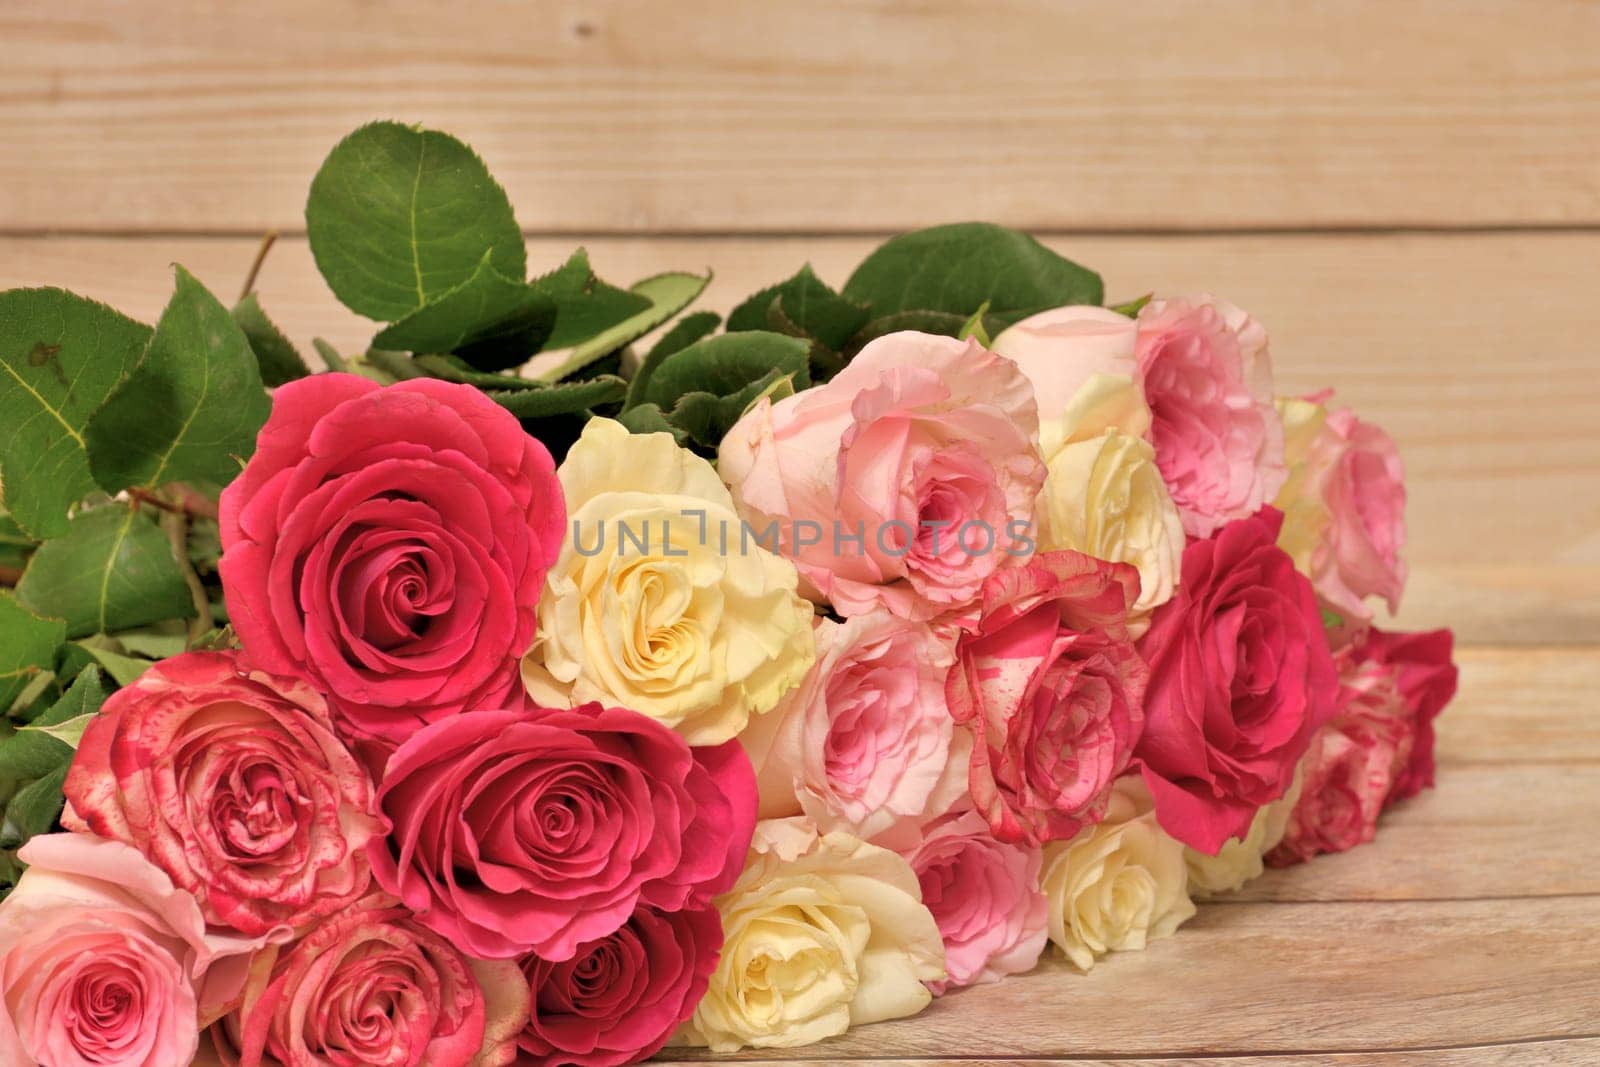 bouquet of yellow and pink roses lies on the table